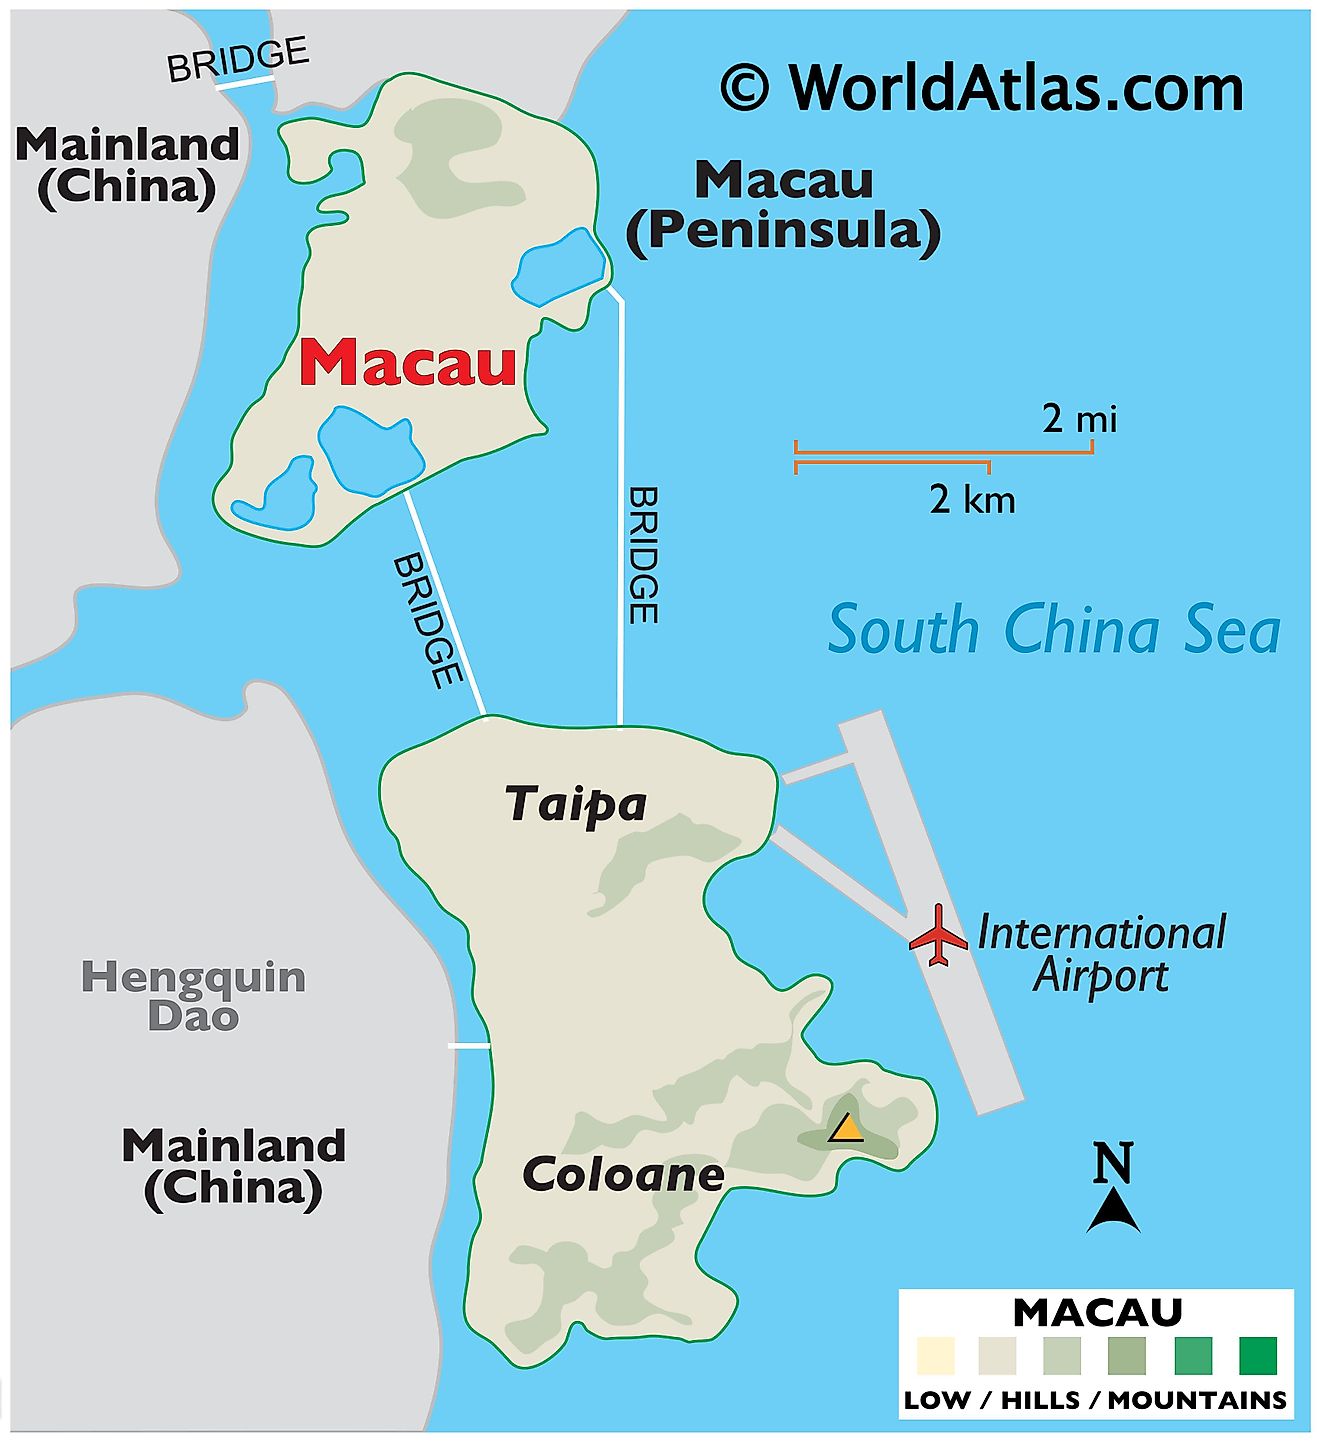 Physical Map of Macao showing the Macao Peninsula, islands of Coloane and Taipa, the surrounding states, etc